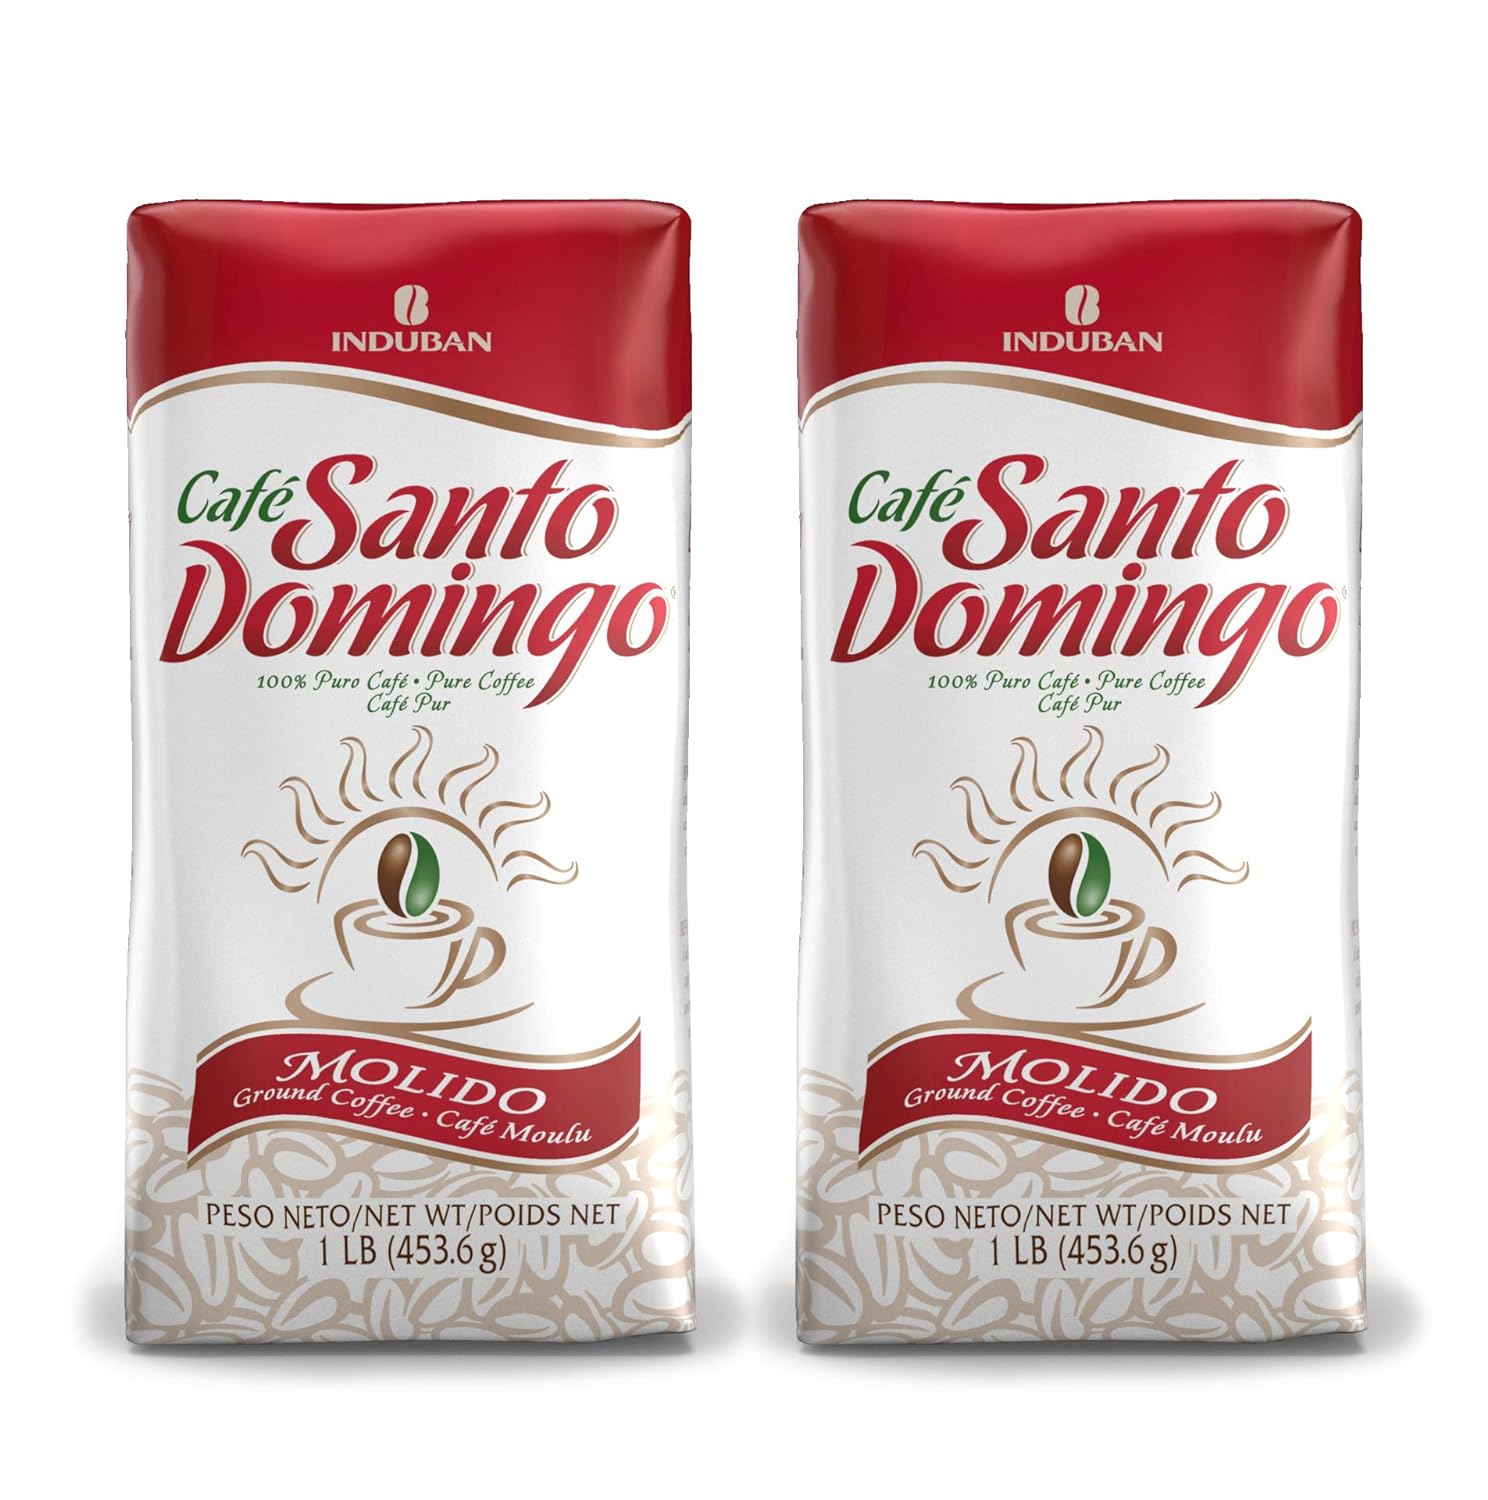 Café Santo Domingo, 16 oz Bag, Ground Coffee, Medium Roast - Product from the Dominican Republic (Pack of 2)